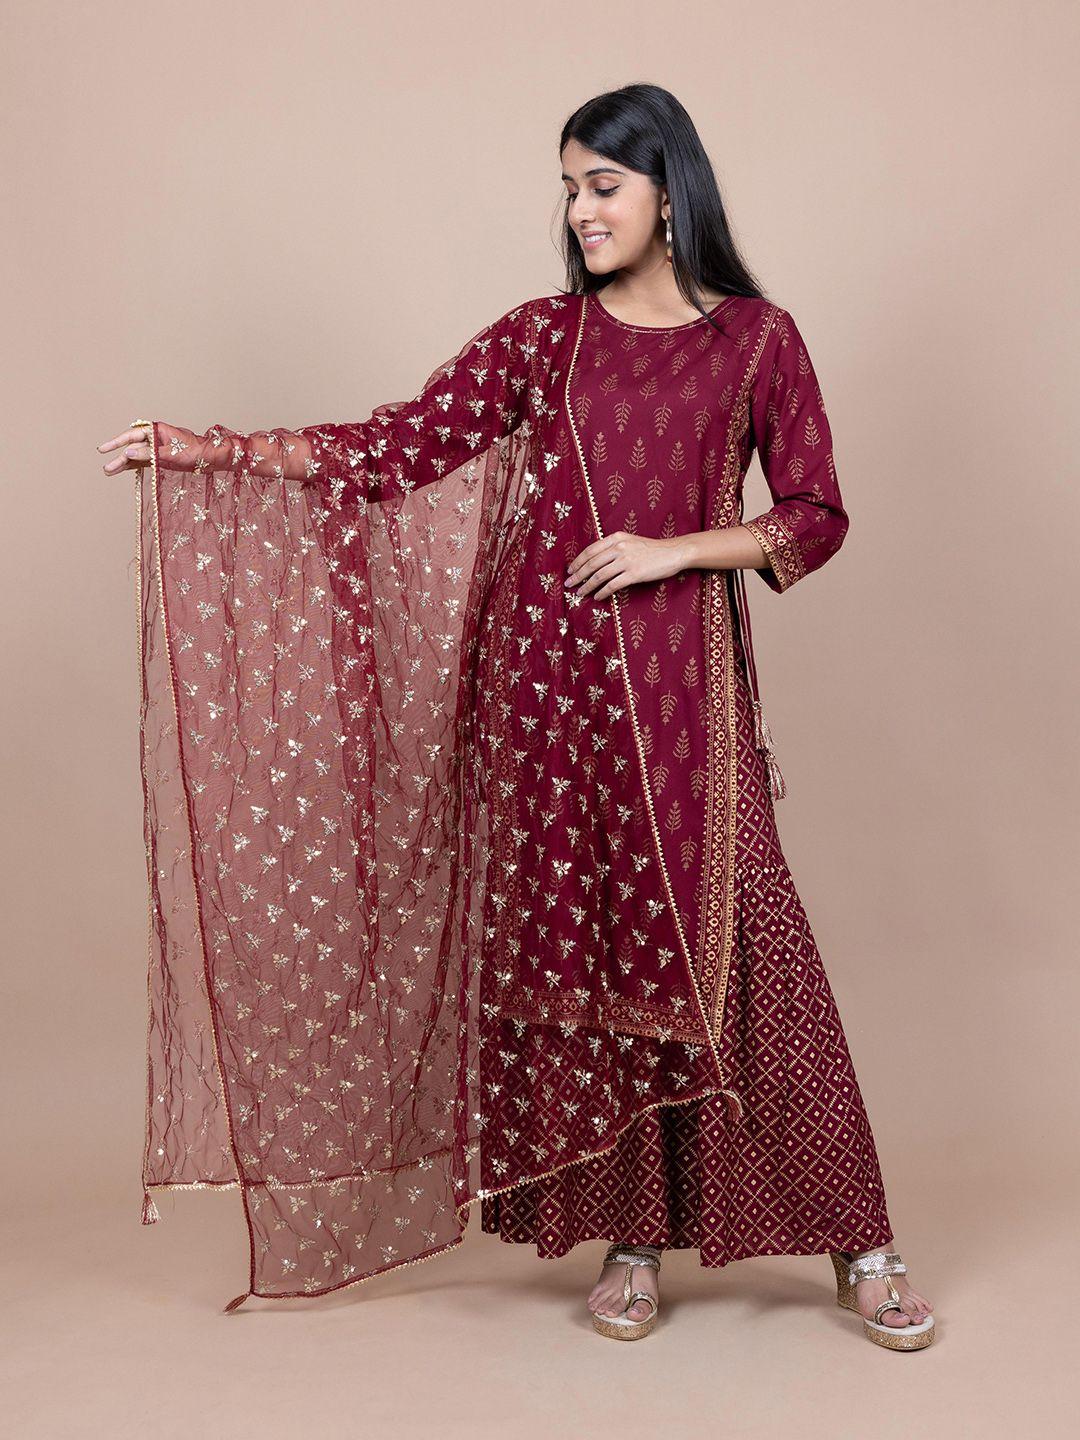 here&now maroon & gold-toned ethnic motifs embroidered gotta patti dupatta